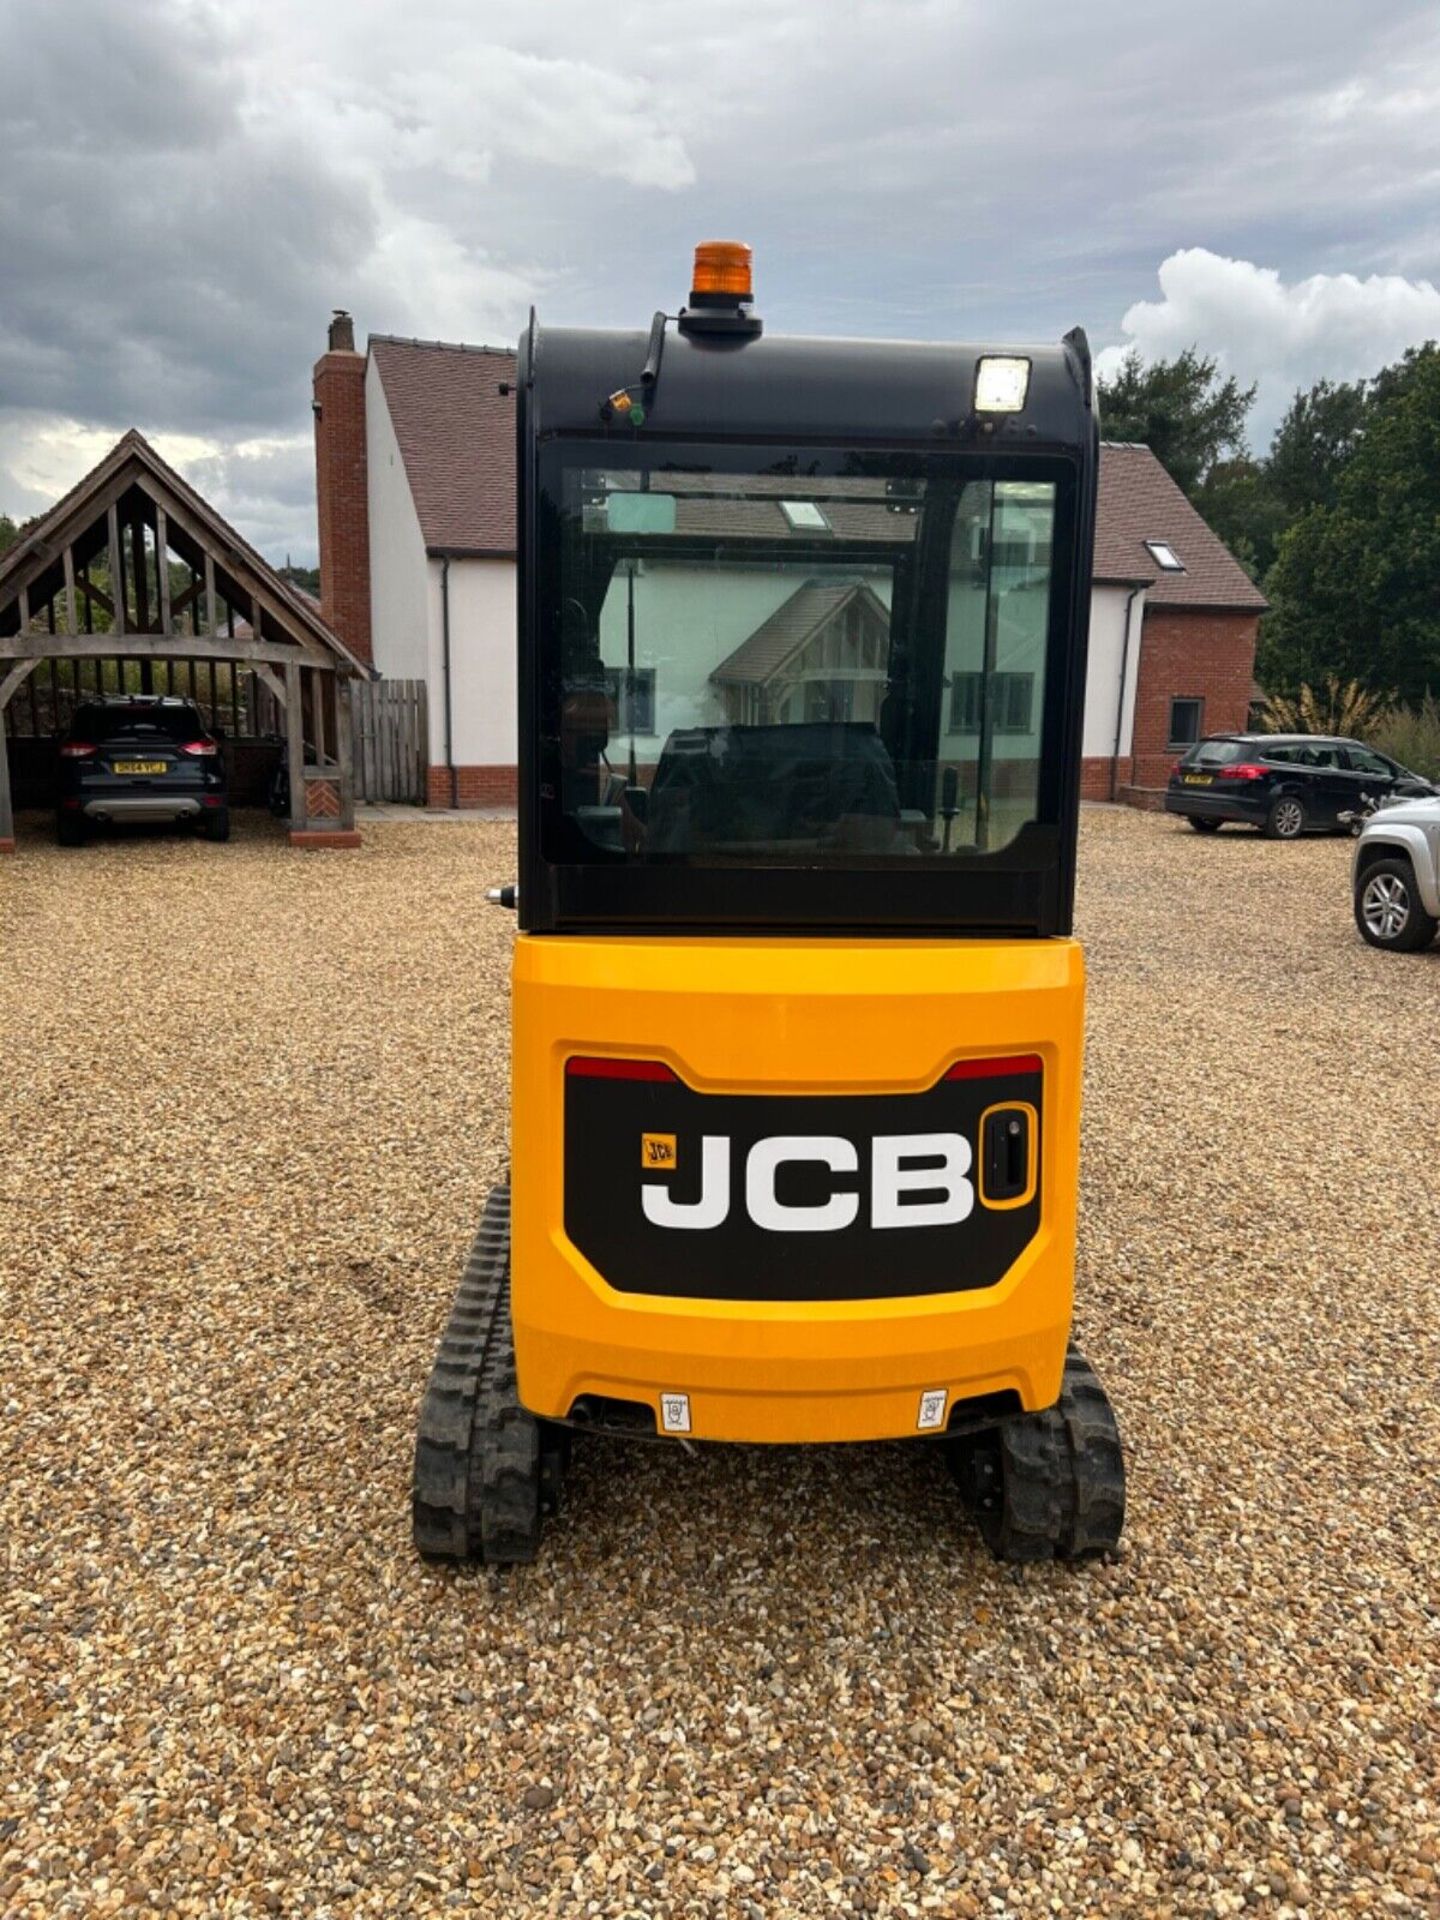 ALMOST NEW: 2022 JCB 16C-1 DIGGER WITH ONLY 160 HOURS - Image 7 of 15